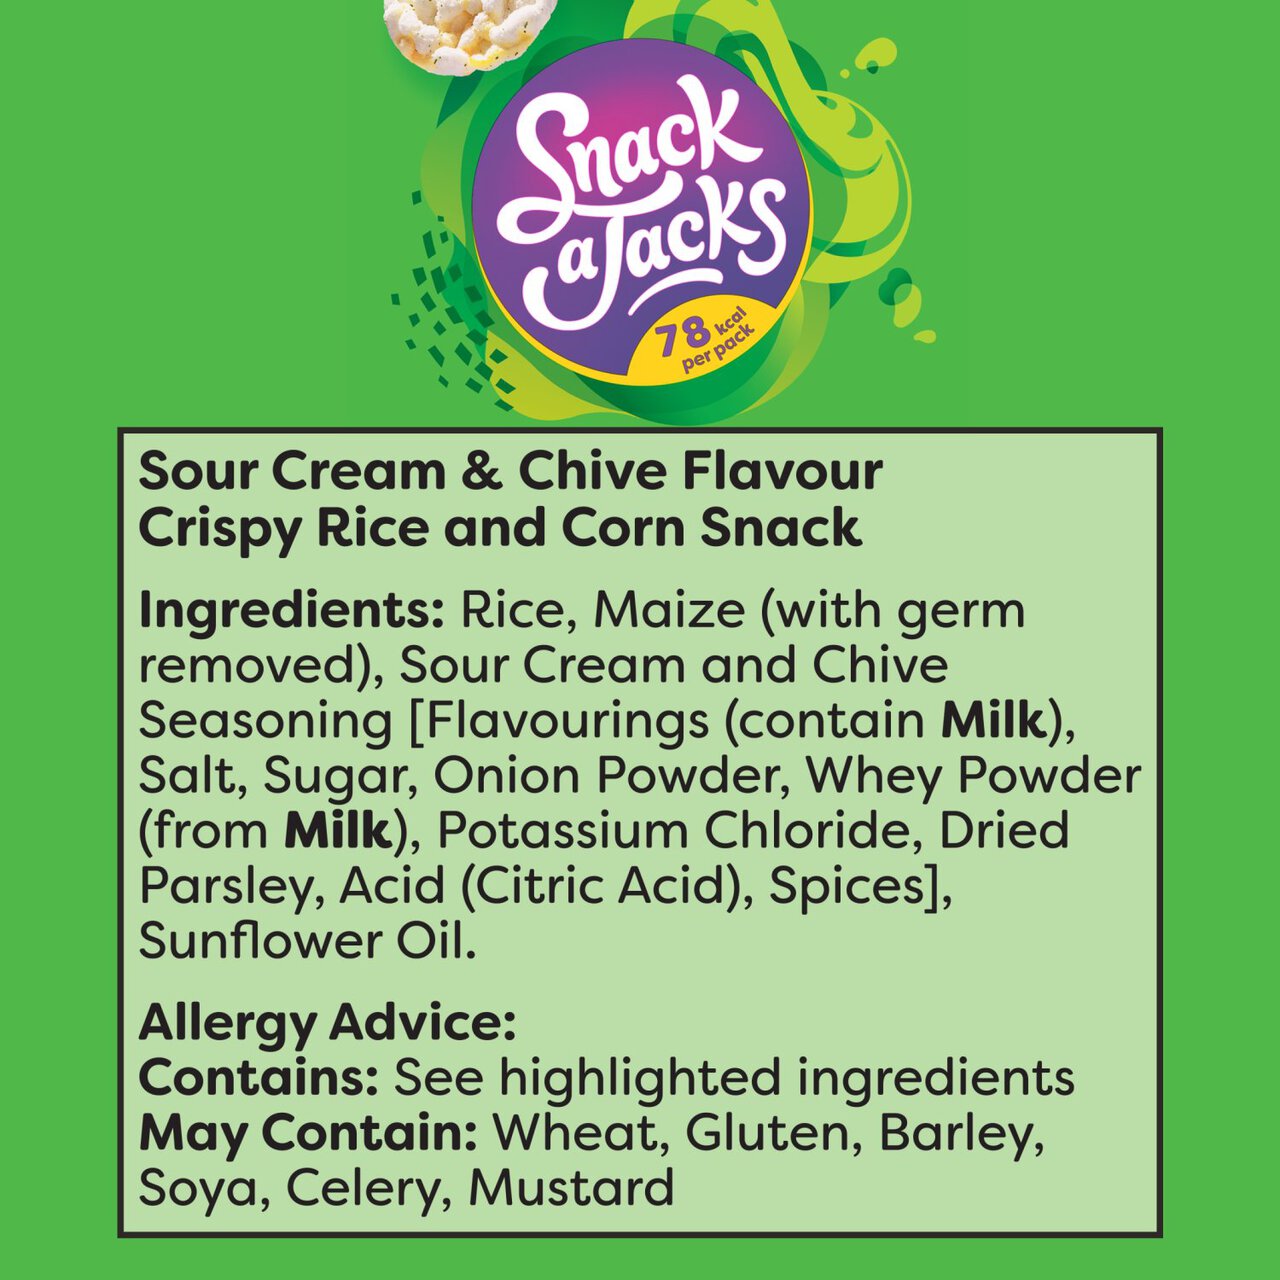 Snack a Jacks Sour Cream & Chive Multipack Rice Cakes 5 per pack